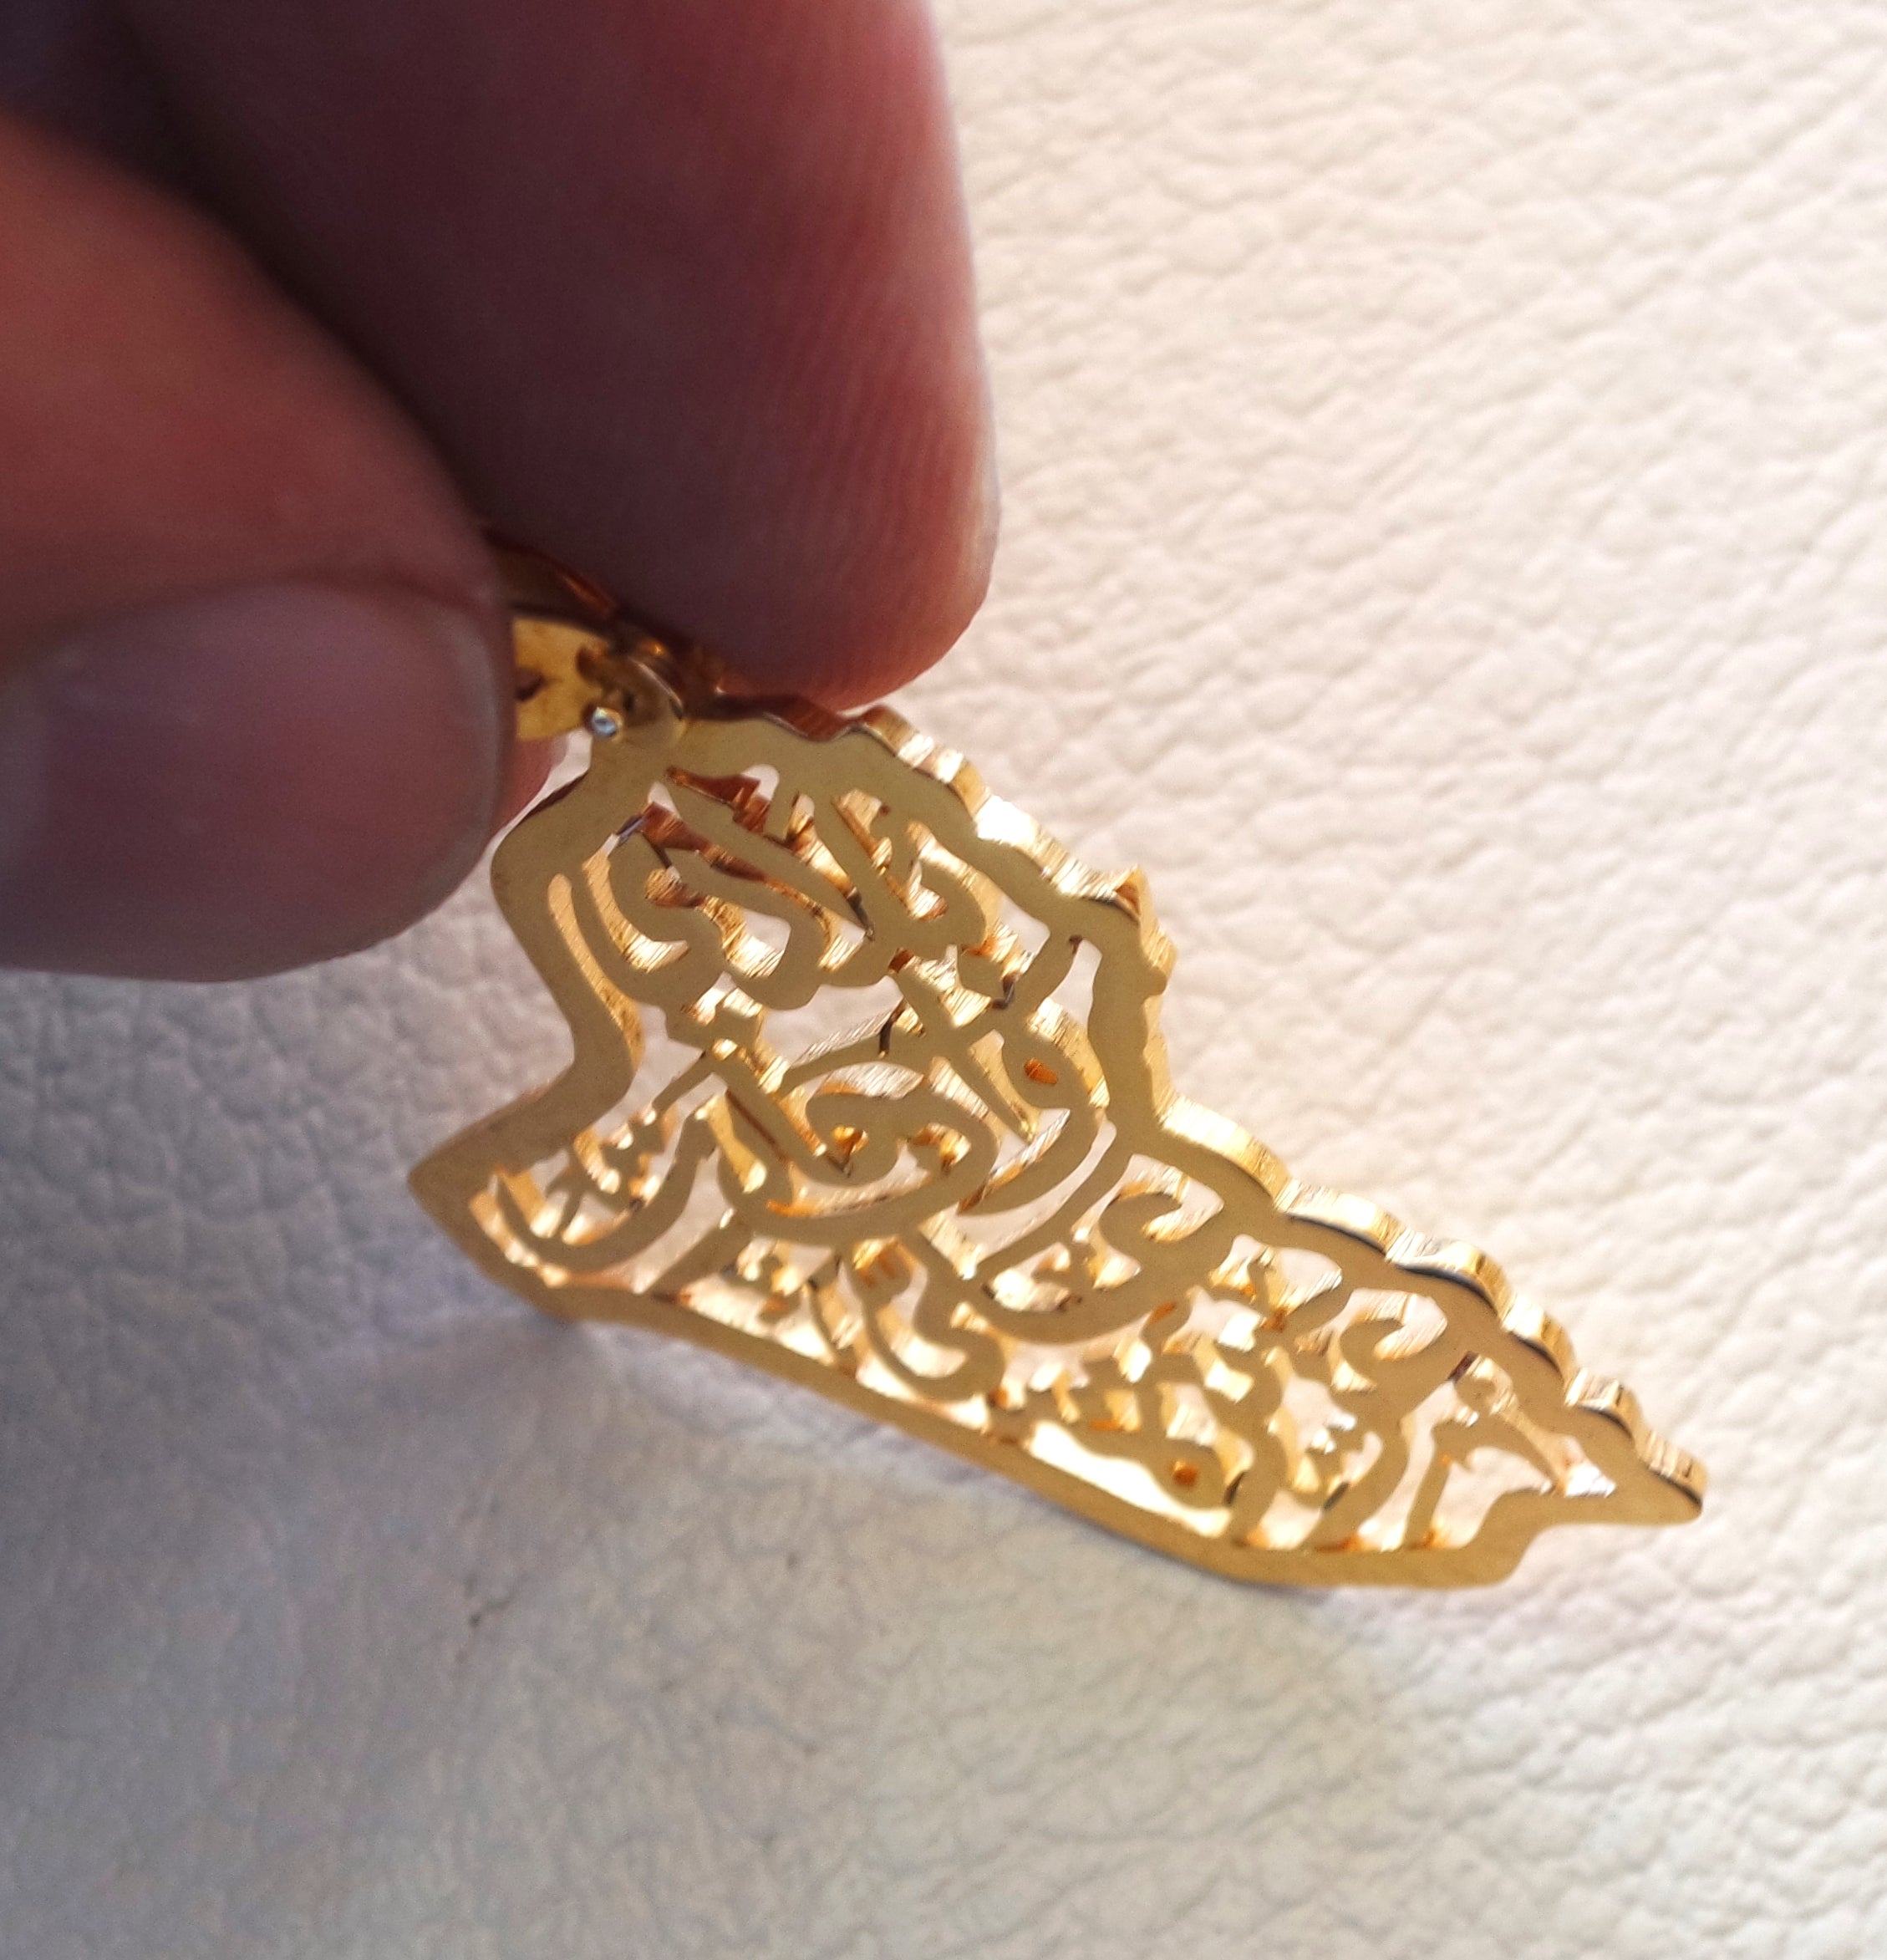 Iraq with frame map pendant with famous poem verse gold 21 k high quality jewelry arabic fast shipping خارطة العراق